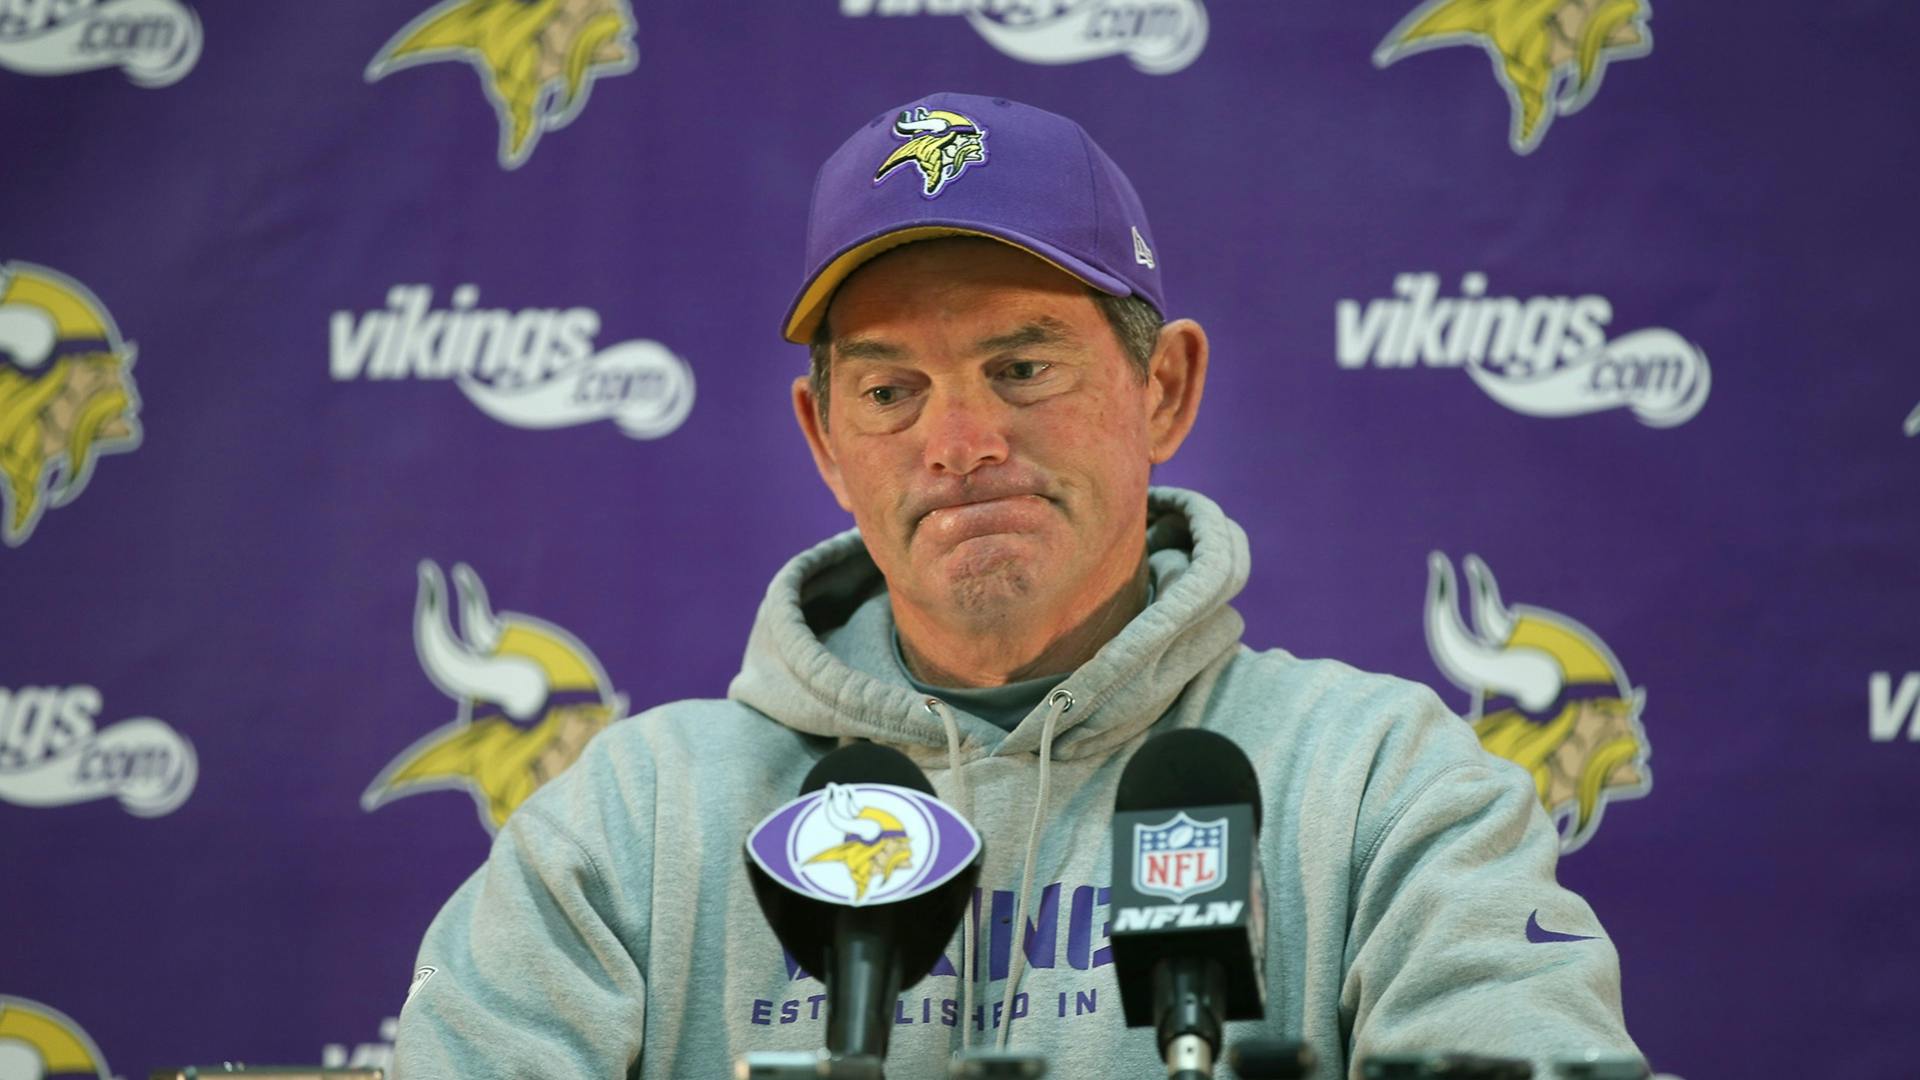 Teddy Bridgewater and Mike Zimmer comment on the news that Vikings running back Adrian Peterson has been suspended for the rest of the season after beating his son with a switch.